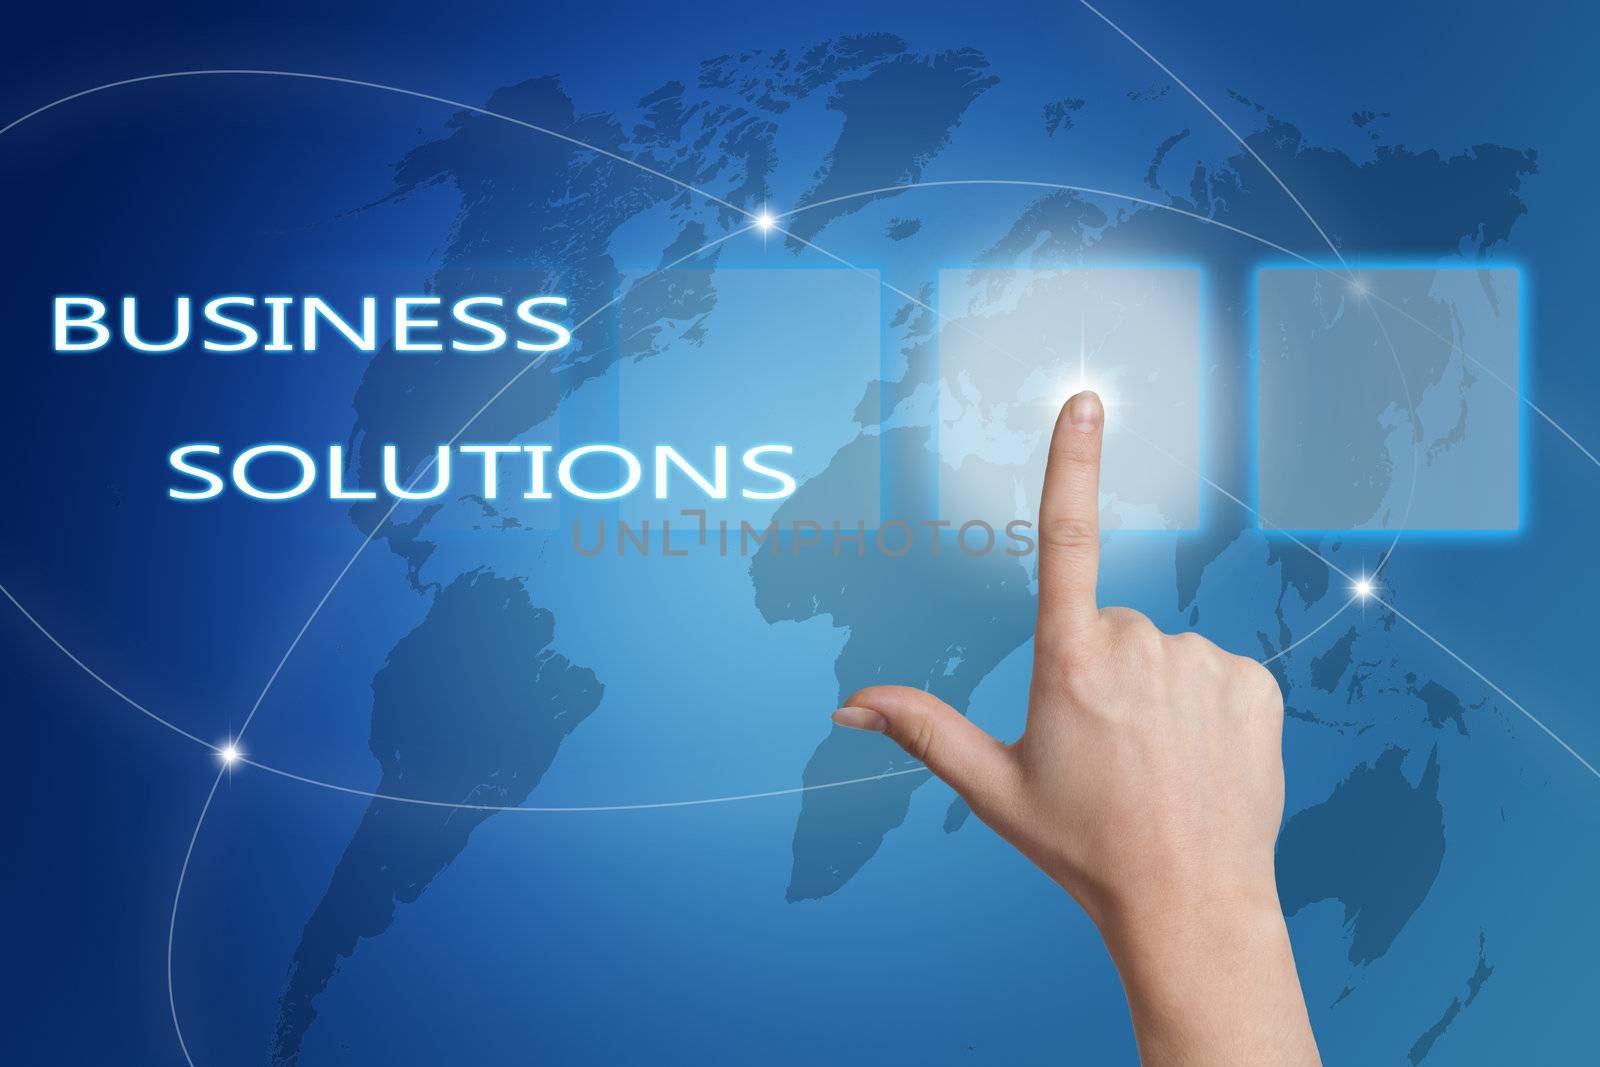 Business Solutions concept Illustration on Blue Background with world map